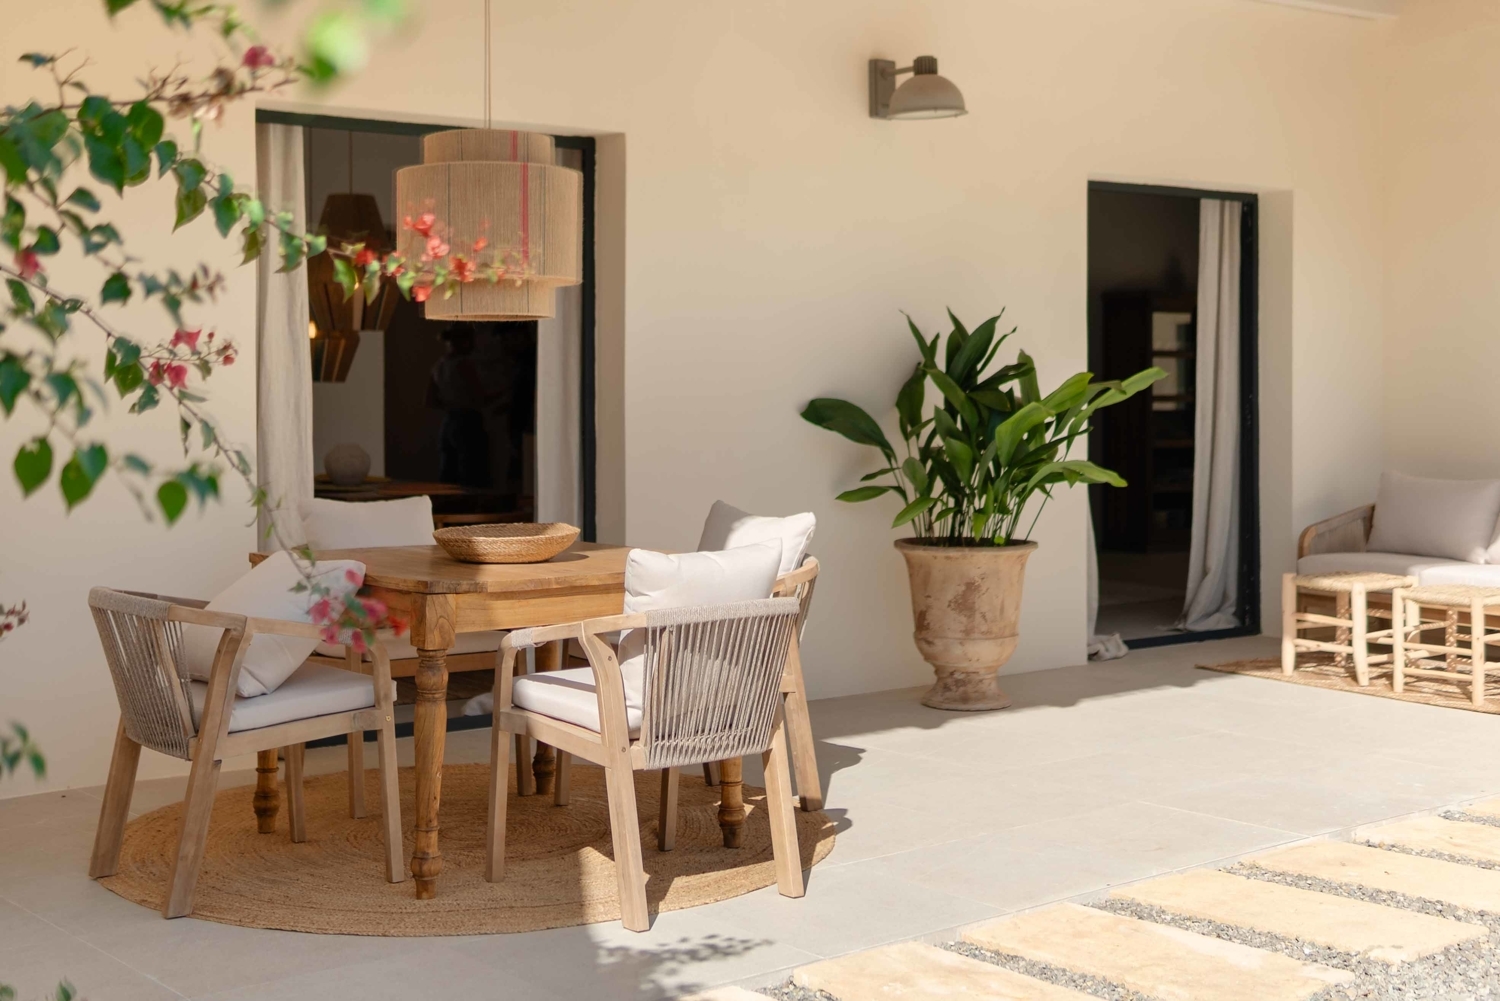 Gorgeous townhouse in the charming village of Ariany in the east of Mallorca